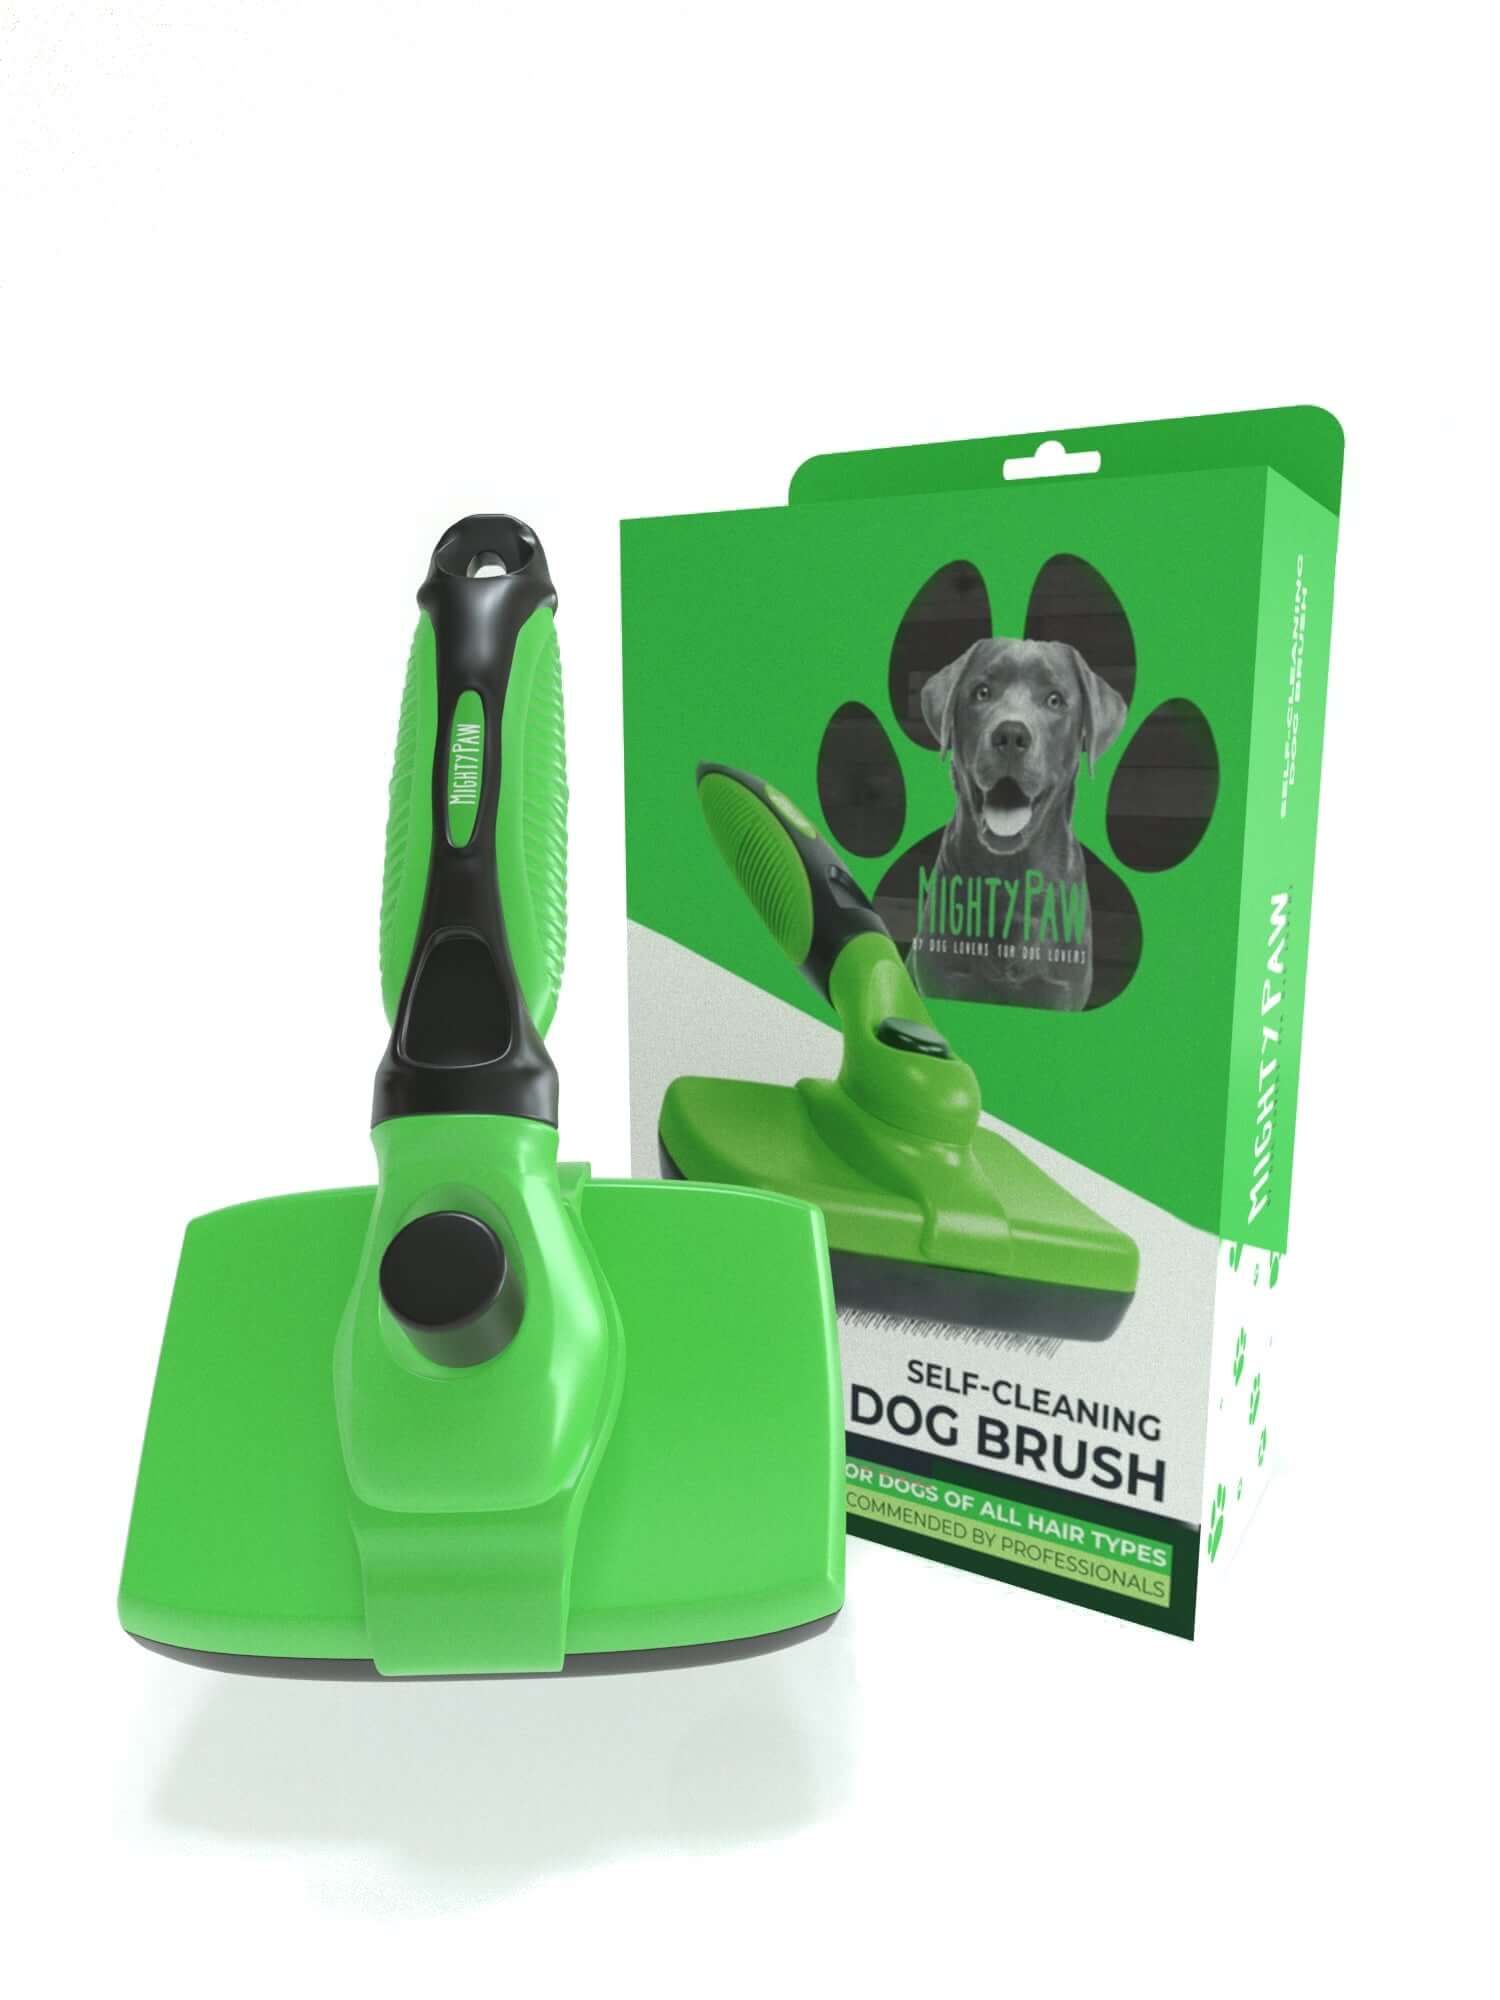 Gentle Grooming Glove and Retractable Brush Set for Dogs